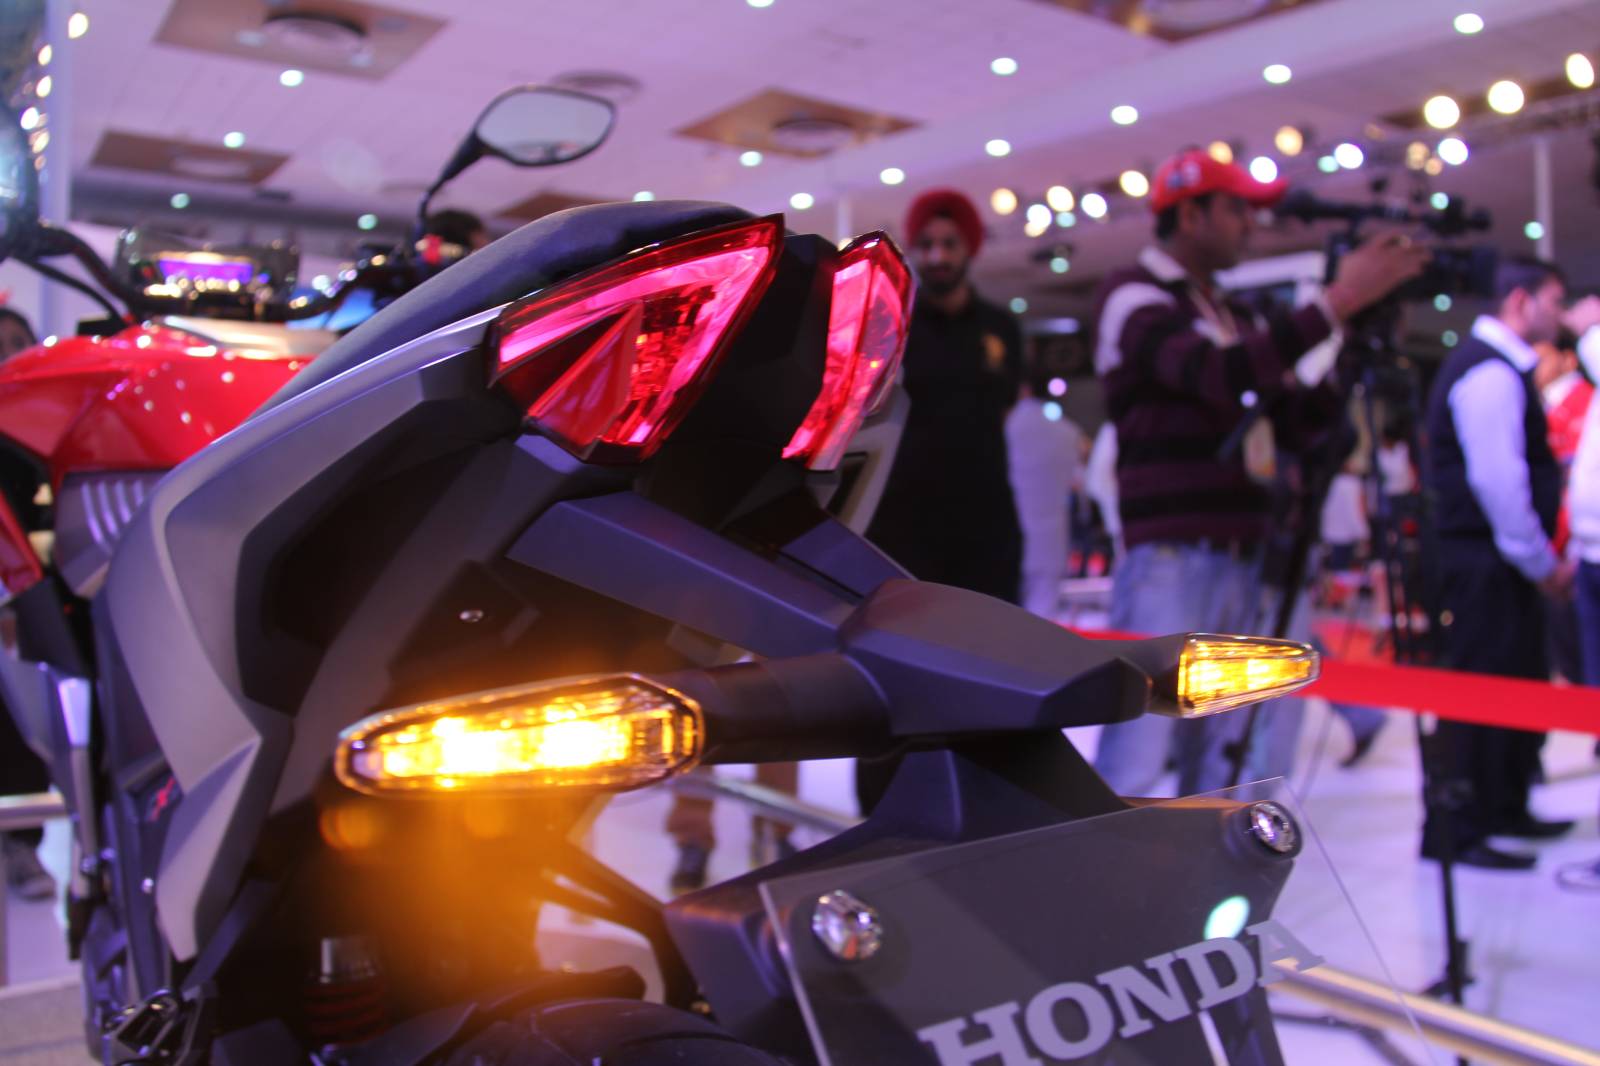 Honda CX-01 – What it’s all about?